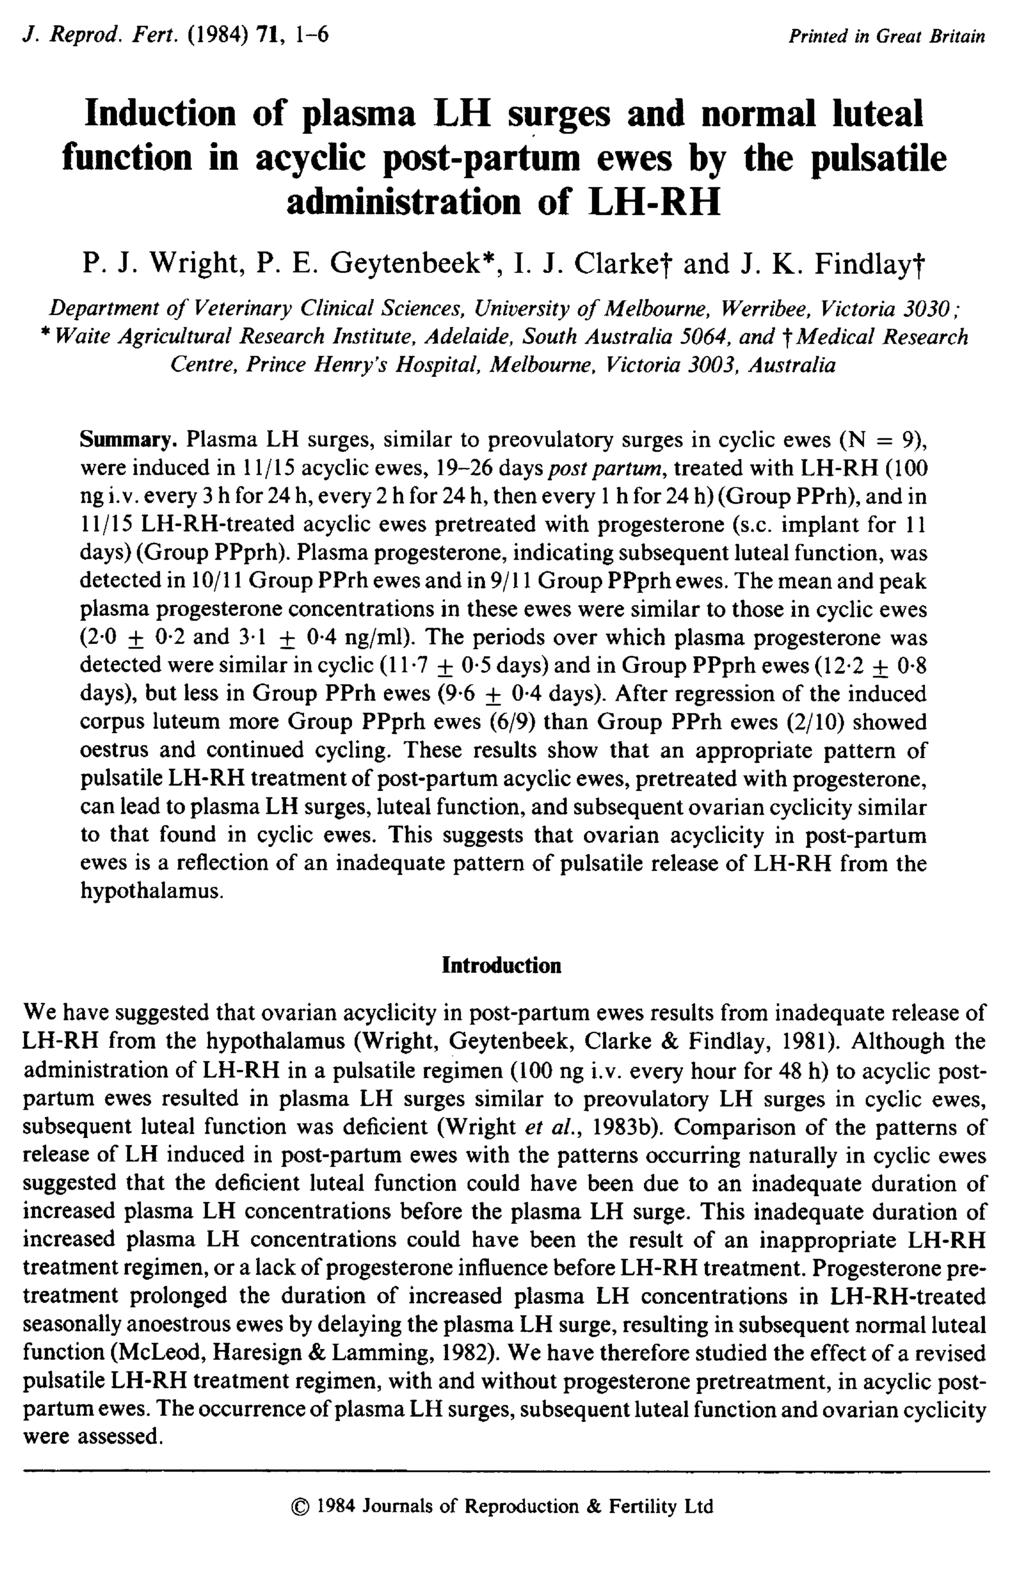 Induction of plasma LH surges and normal luteal function in acyclic post-partum ewes by the pulsatile administration of LH-RH P. J. Wright, P. E. Geytenbeek, I. J. Clarke and J. K.